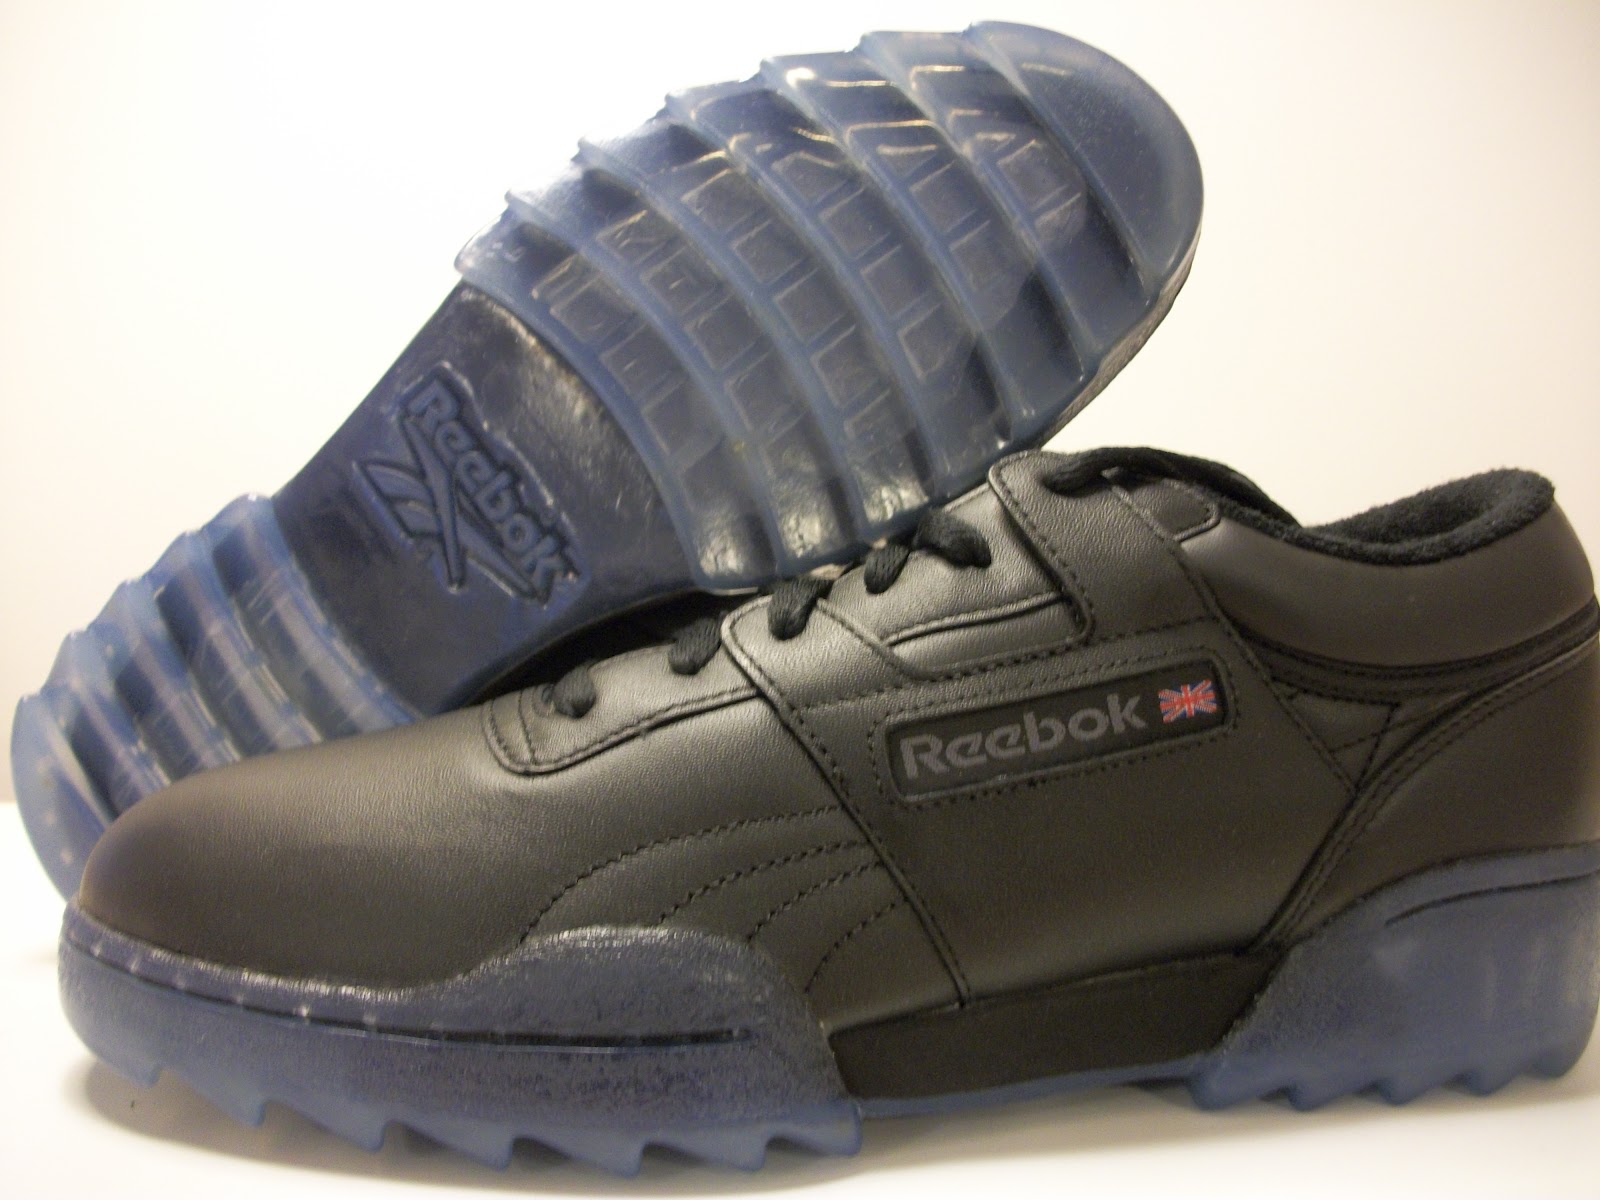 E.V.R Brand: One of our store brands, Reebok...signs Rick Ross to help ...